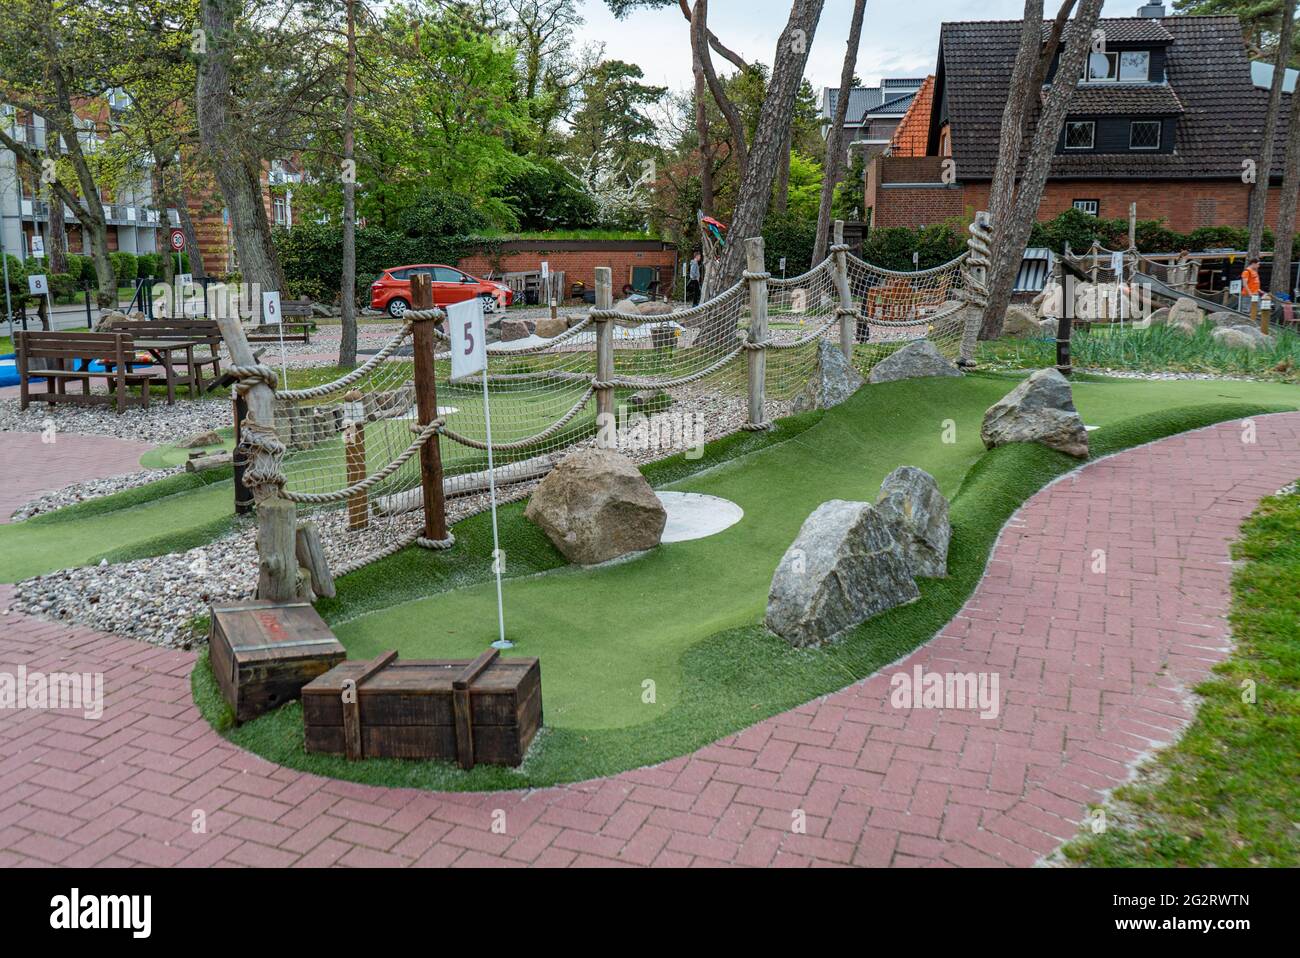 Miniature golf course at the beach - CITY OF LUBECK, GERMANY - MAY 10, 2021 Stock Photo